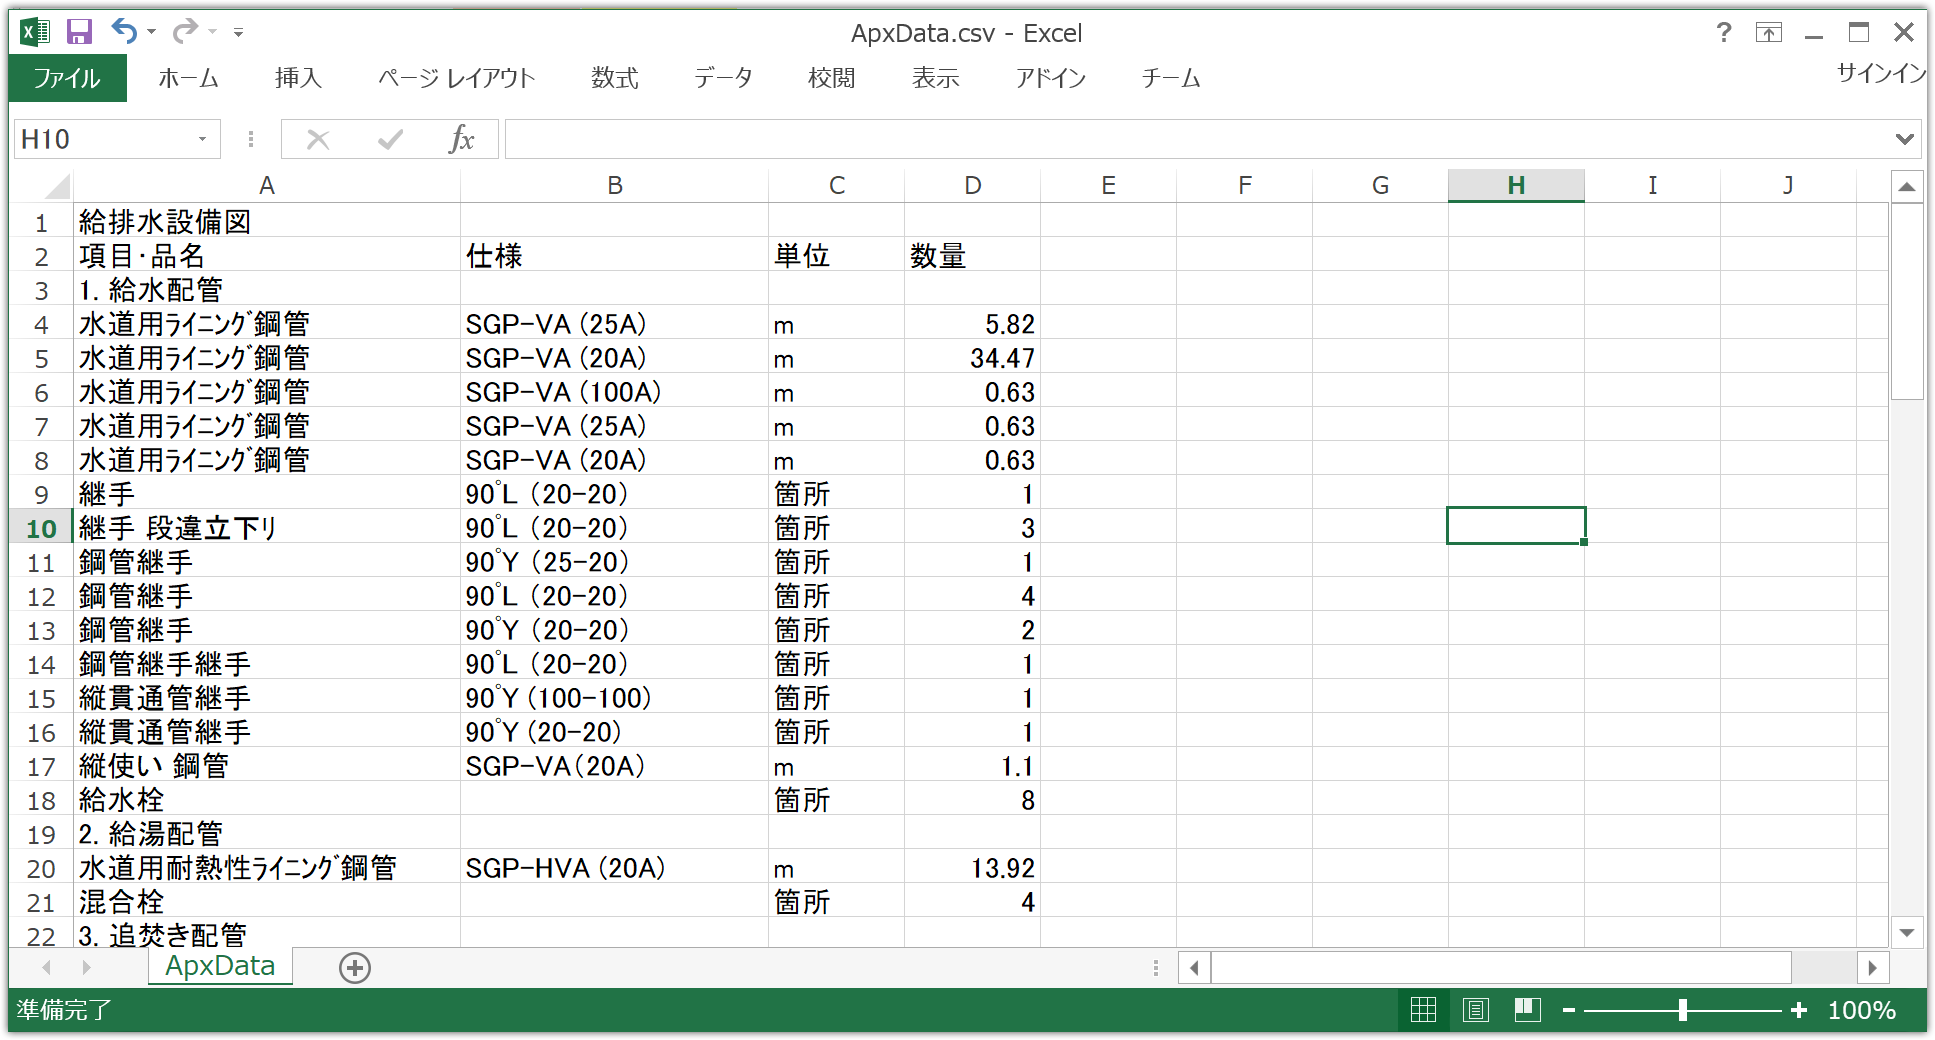 ApxData.csv_-_Excel_2018-04-20_12.50.27.png